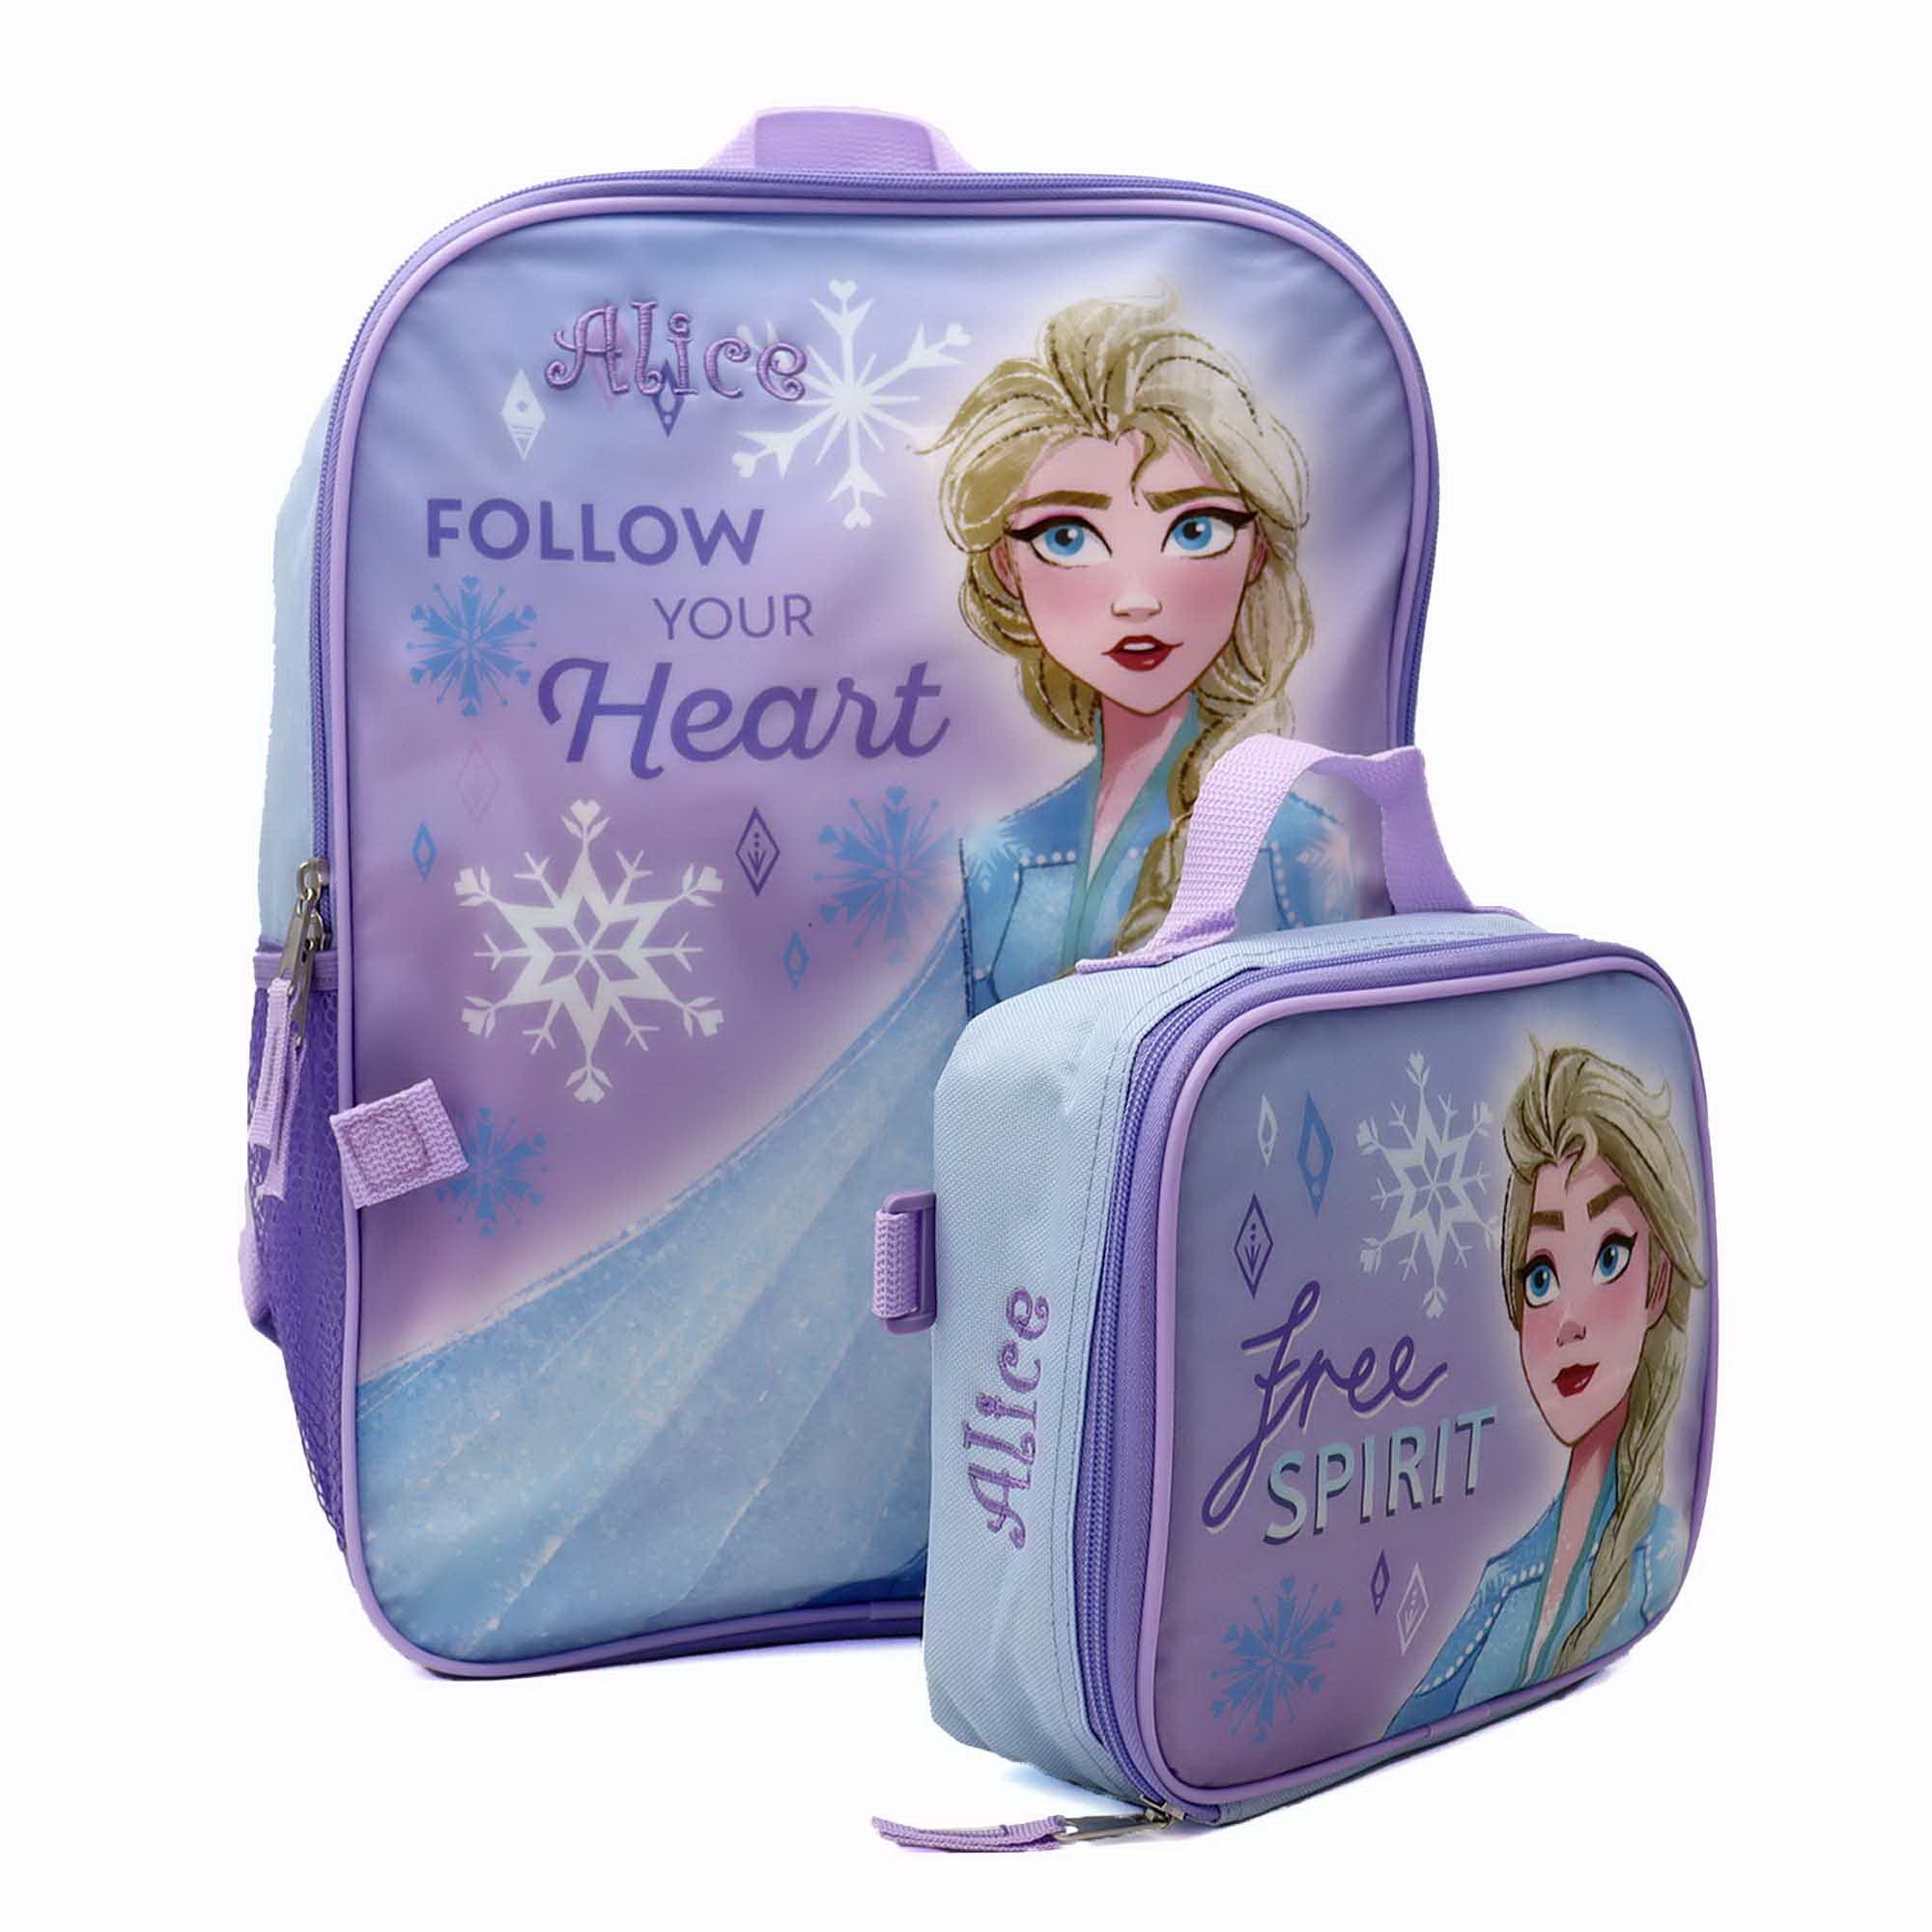 Personalized Backpack Lunch Box Combo created using Disney Frozen Backpack Lunchbox Combo